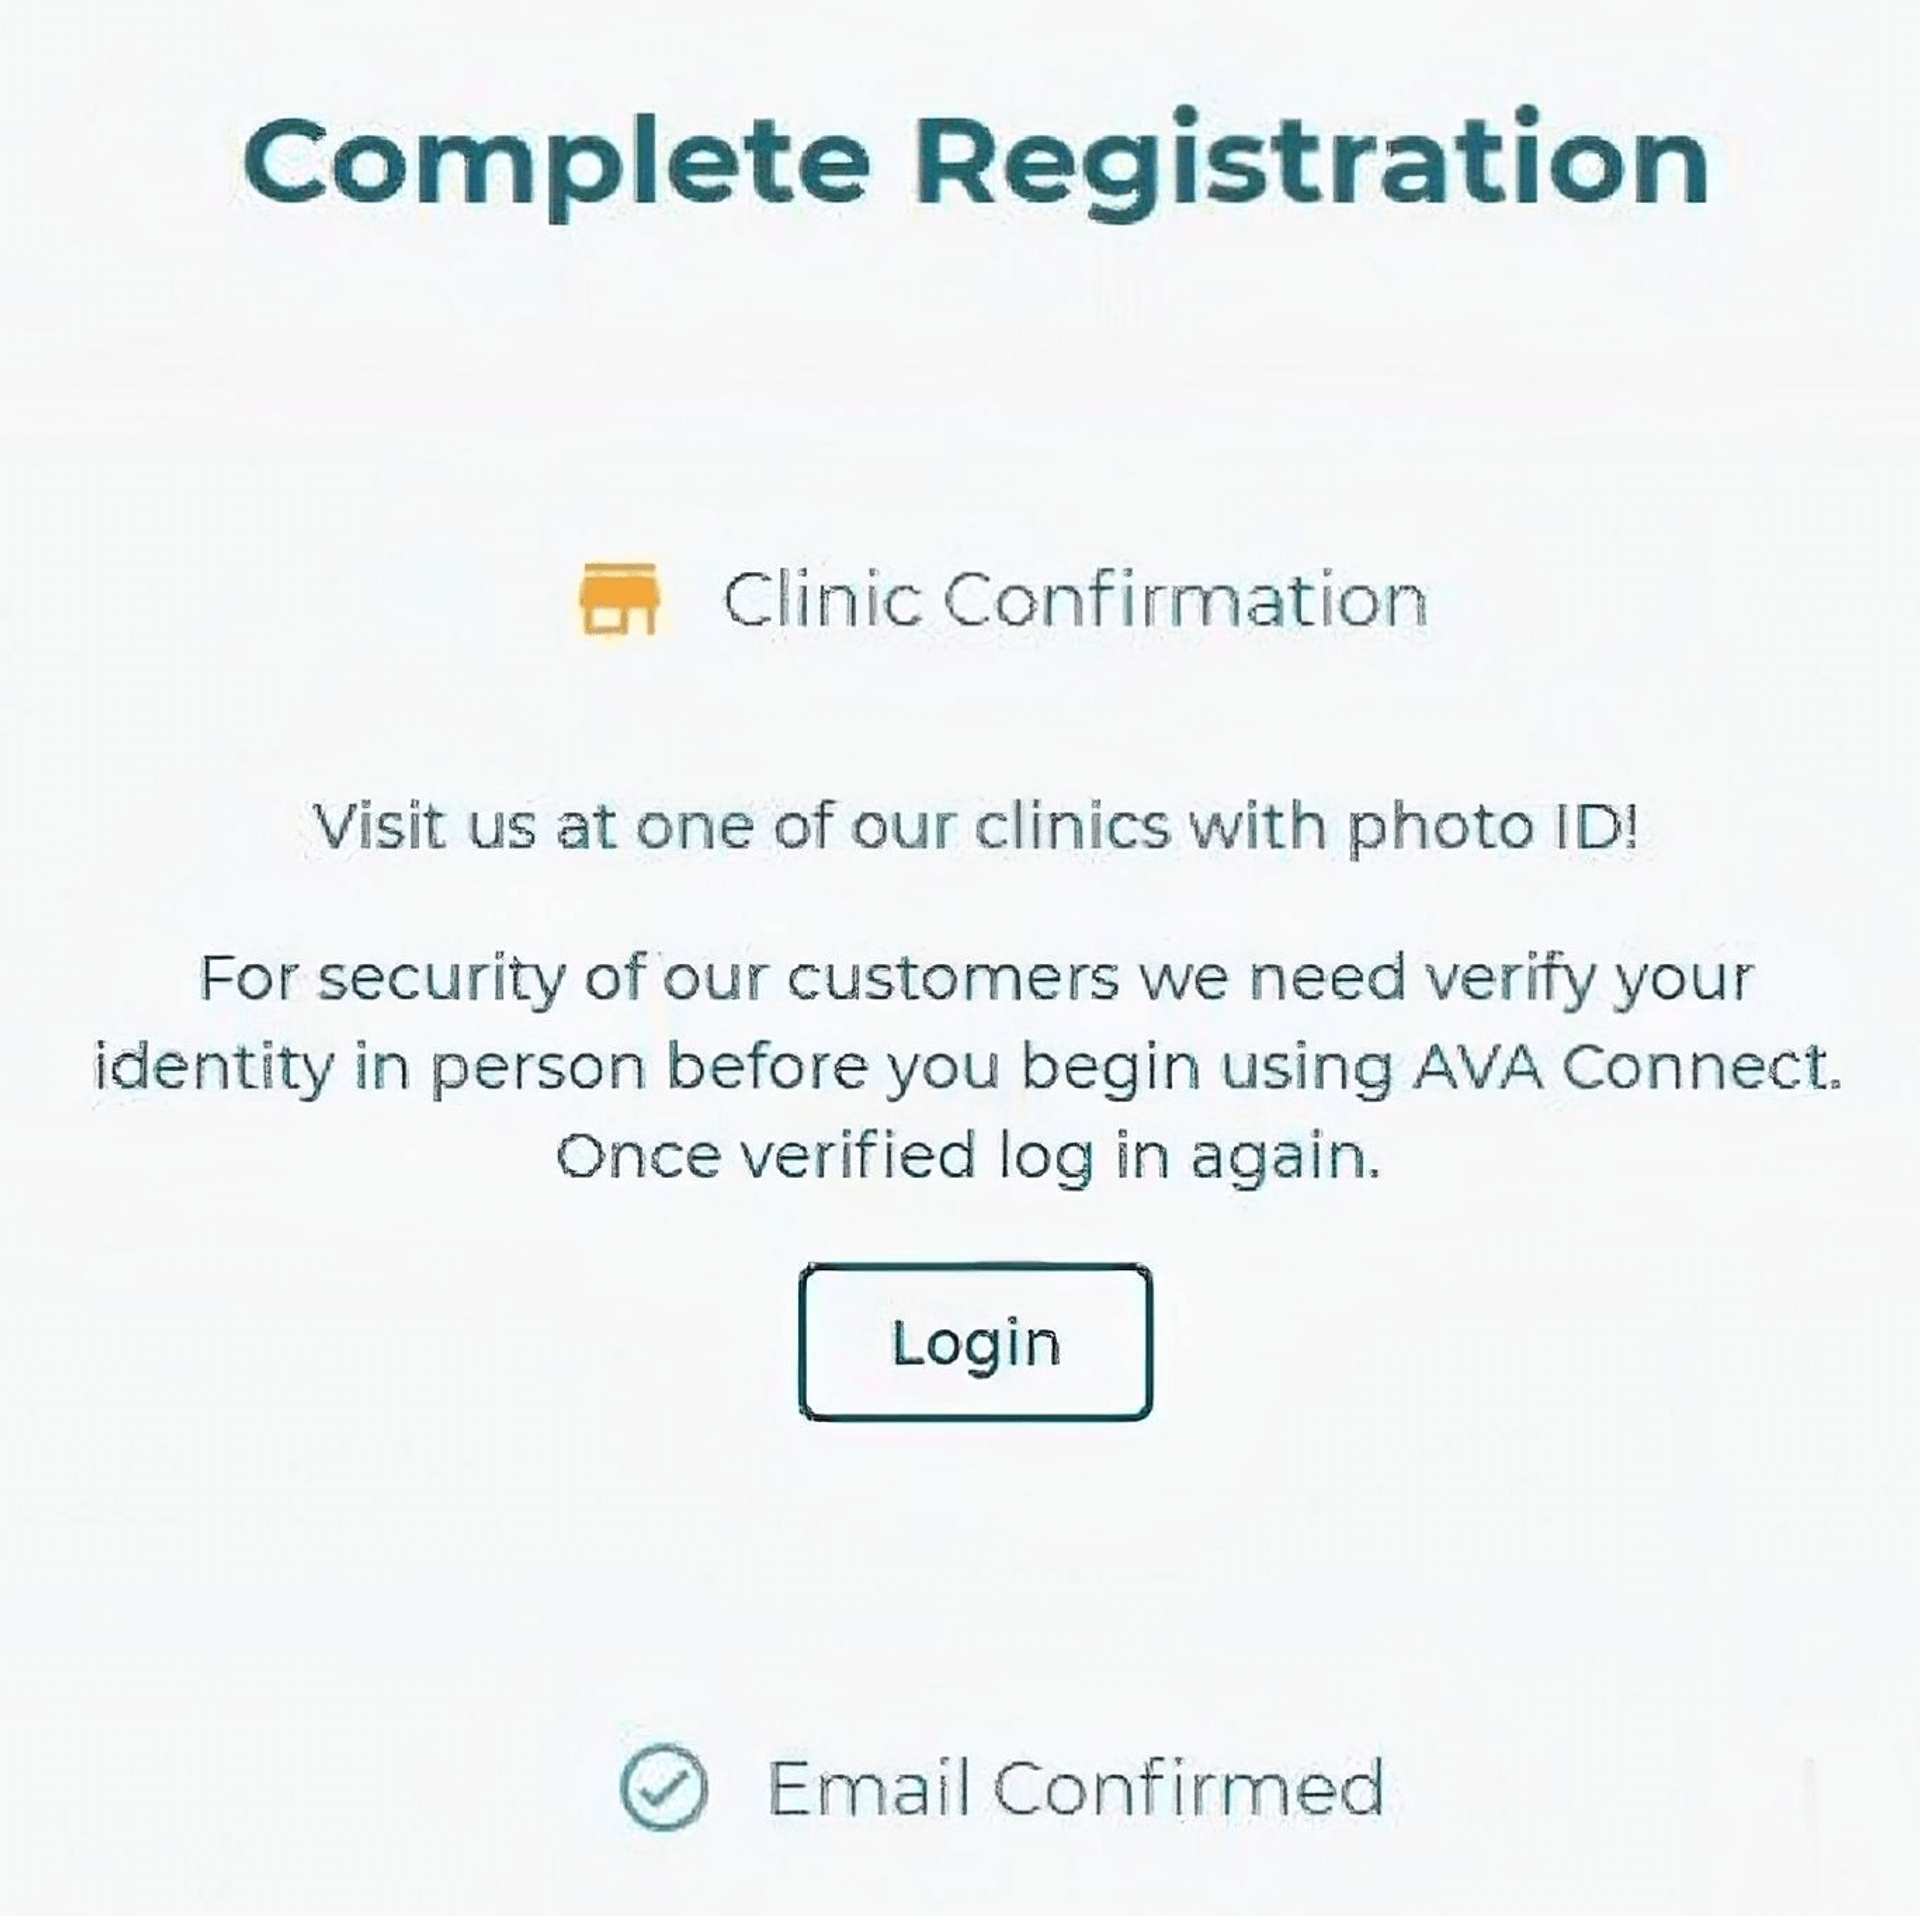 Complete Registration prompt with a button labeled 'Login'